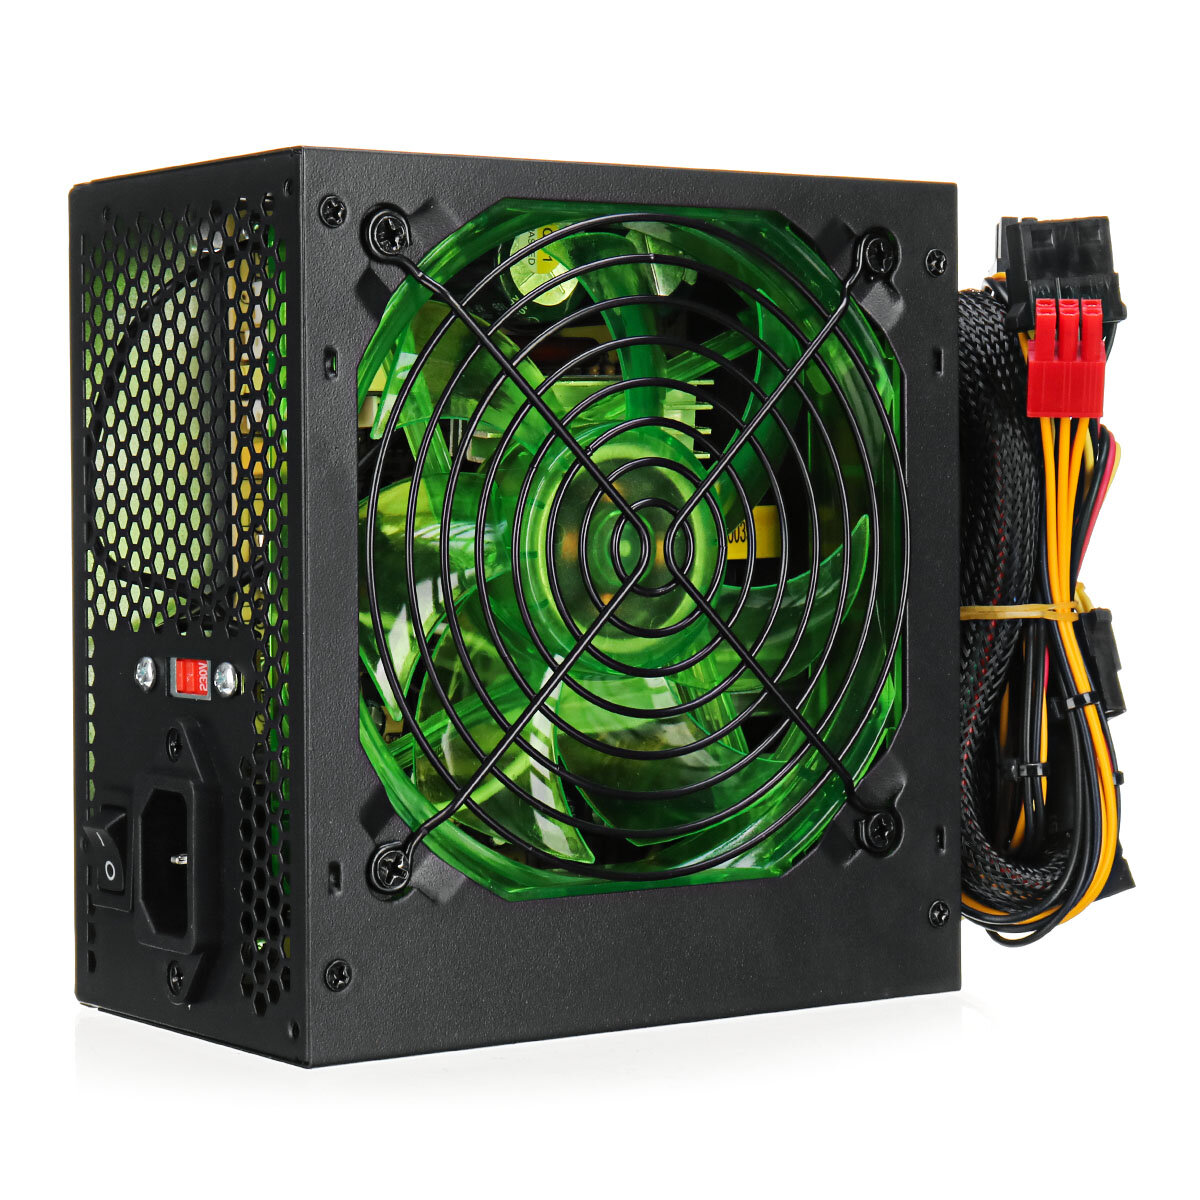 500W Power Supply 120mm LED Cooling Fan 24 Pin PCI SATA ATX 12V Computer Power Supply